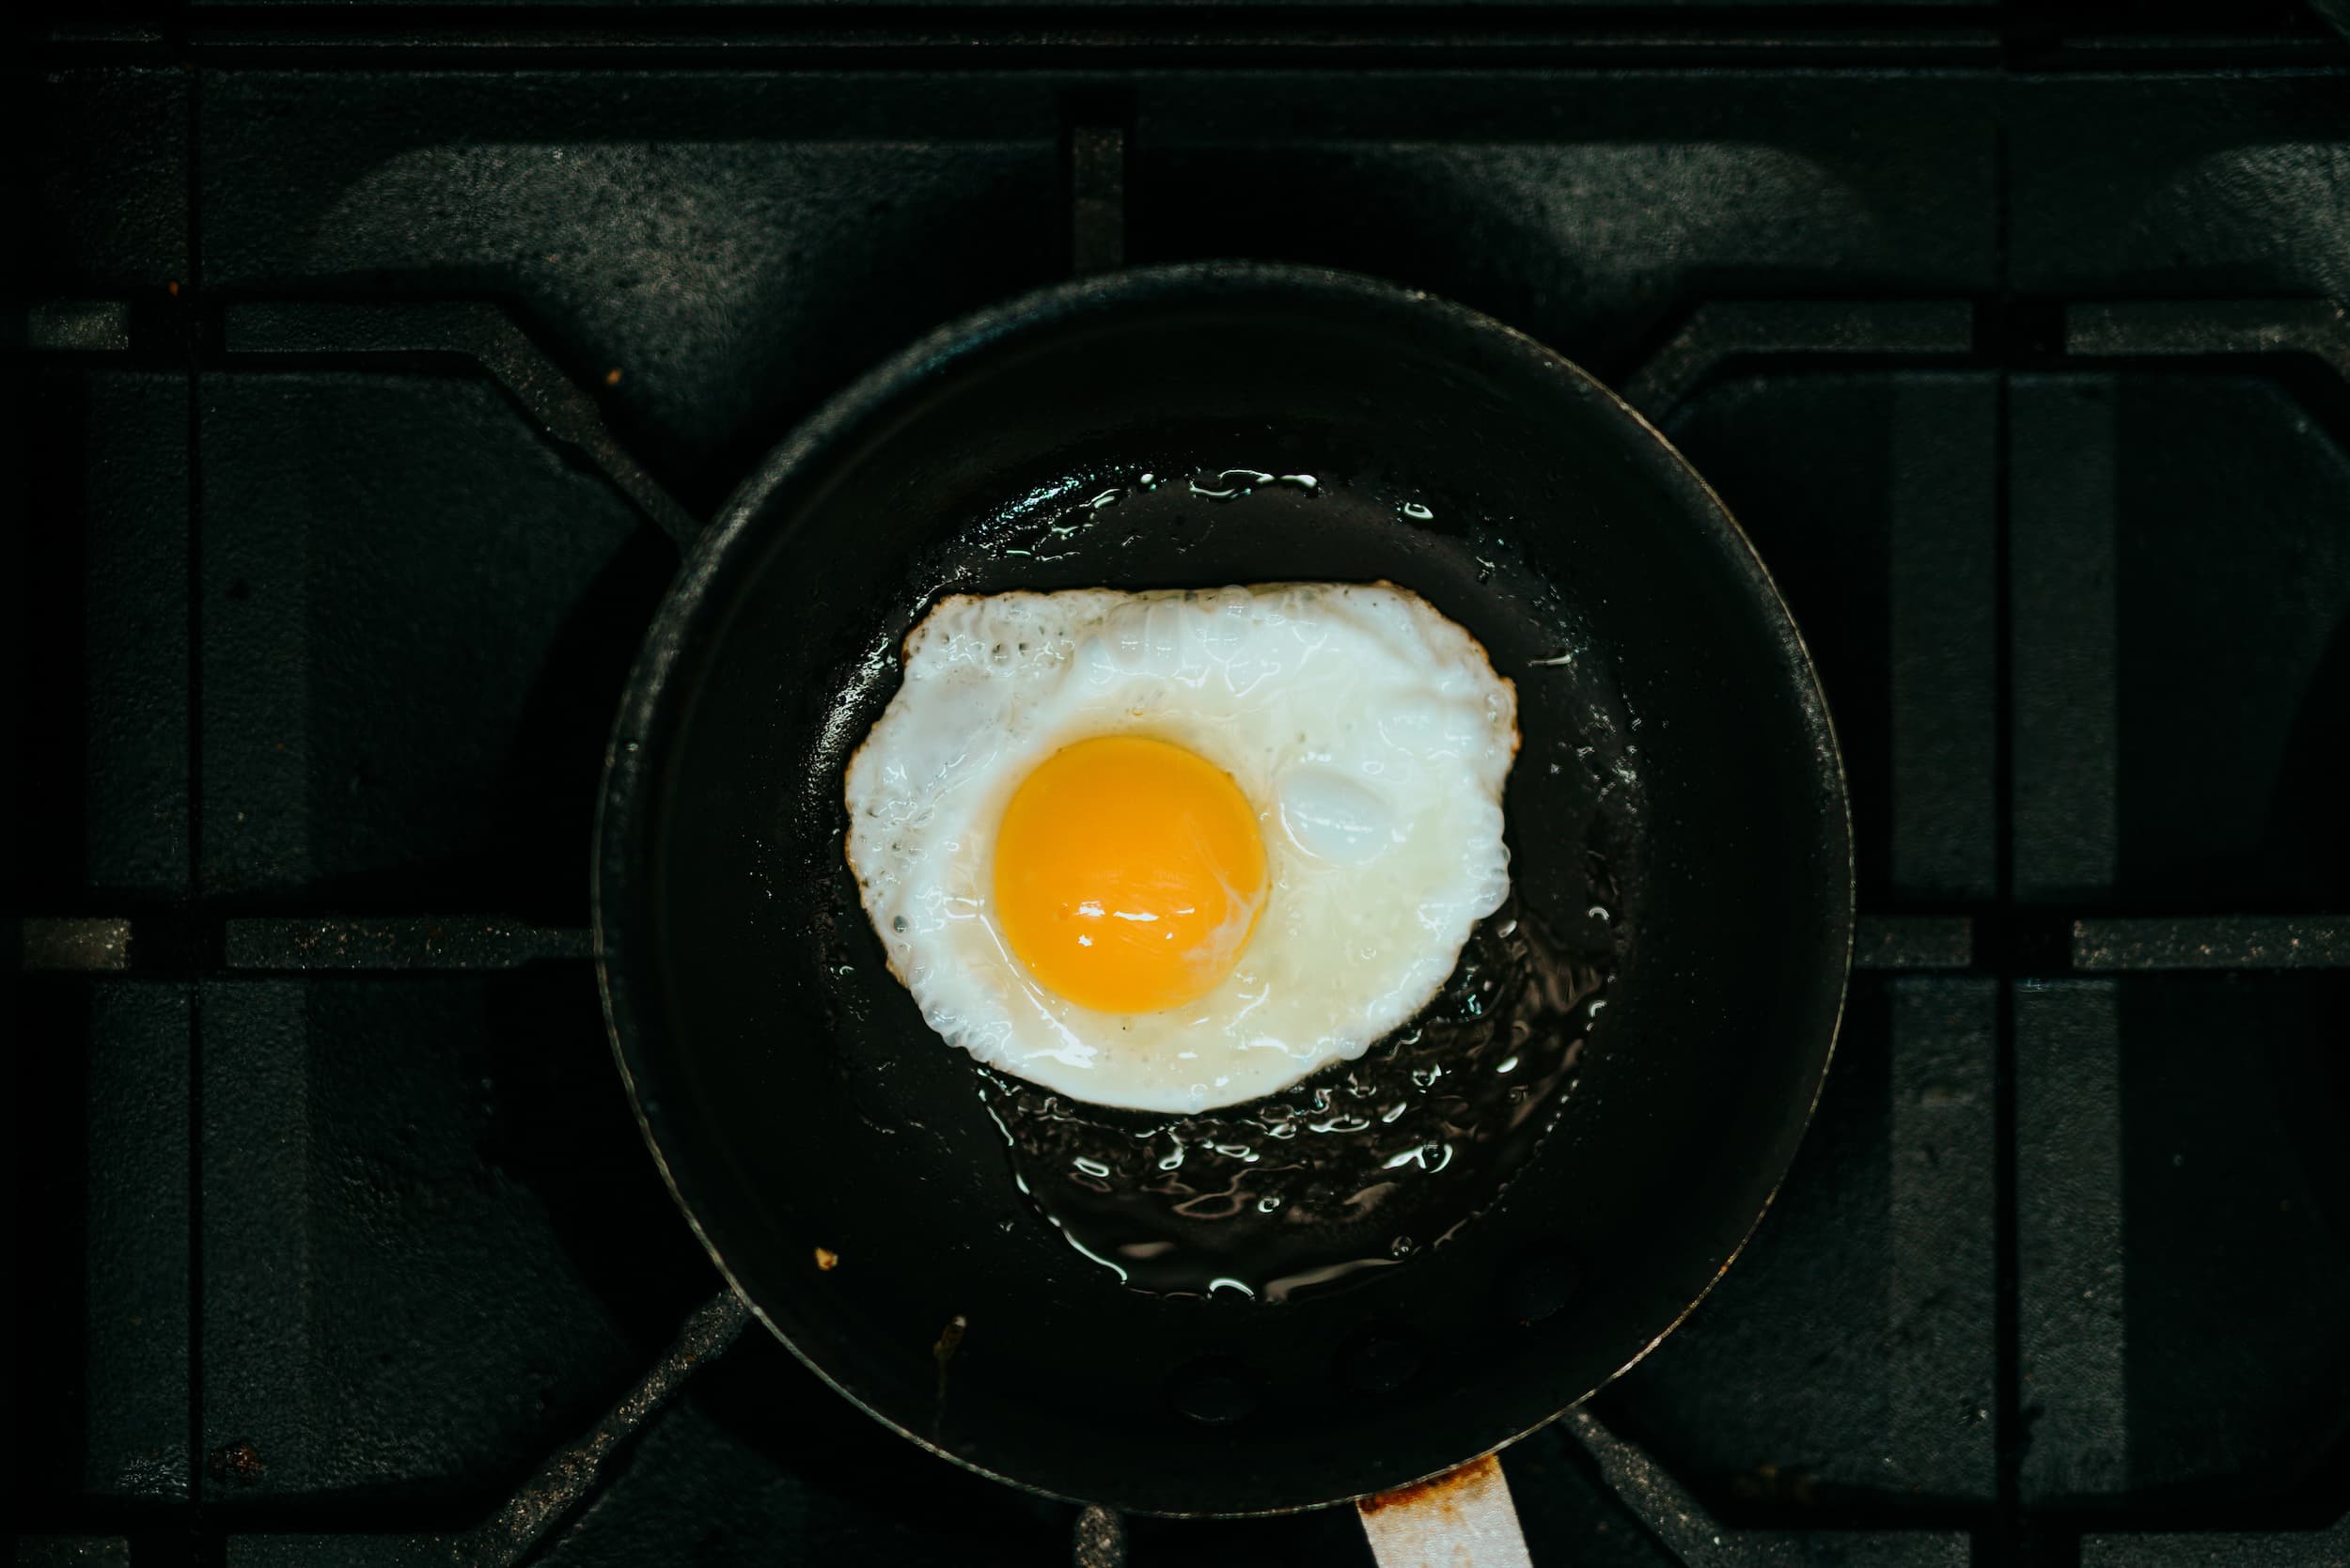 Fried egg in a pan